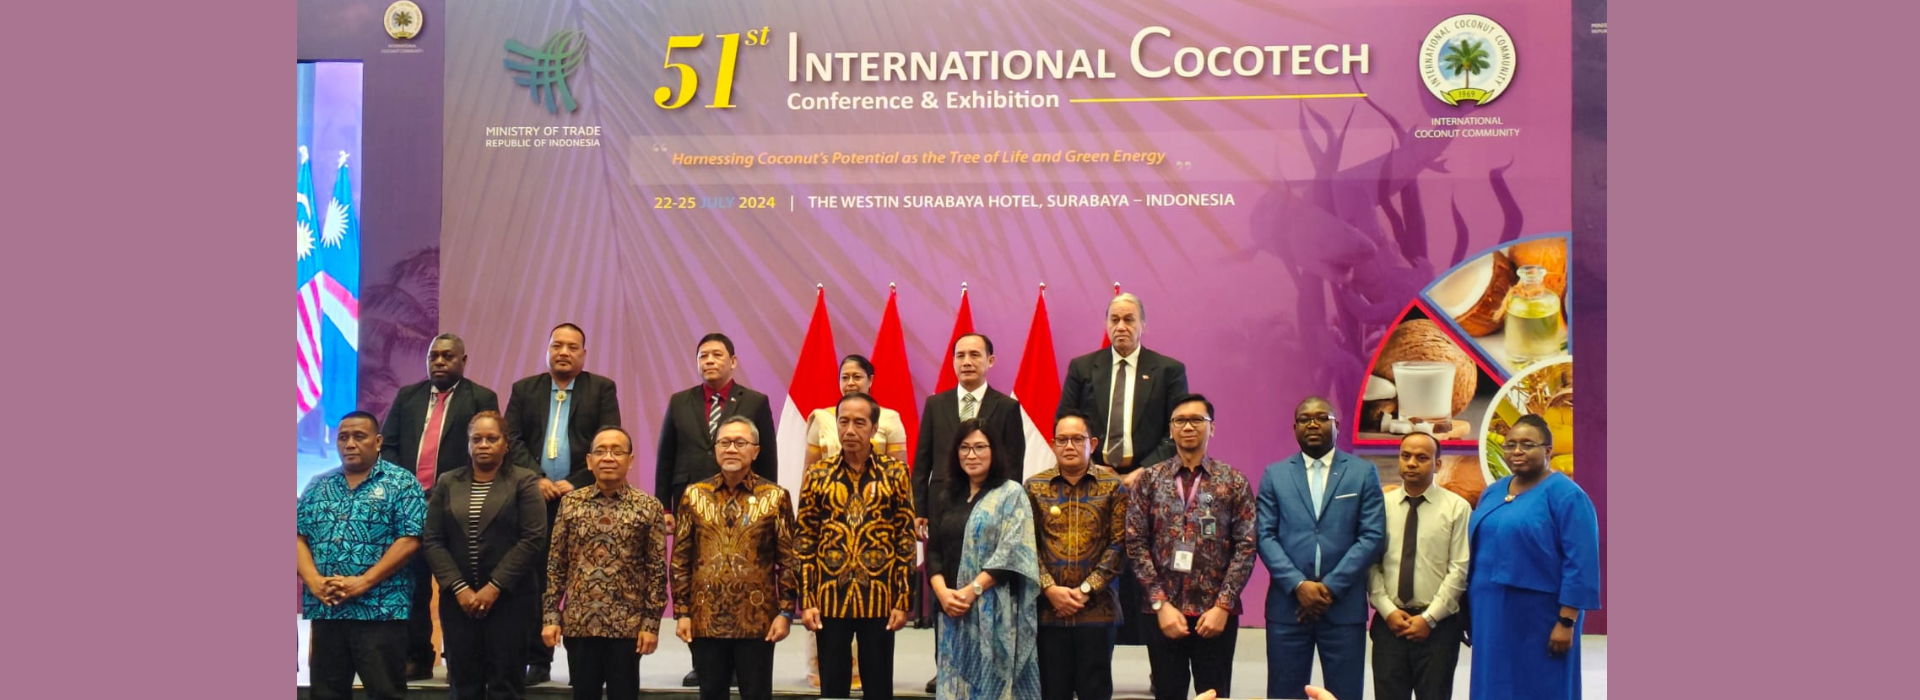 highlights-of-the-1st-day-of-the-51st-international-cocotech-conference-exhibition-202420240723054606.png